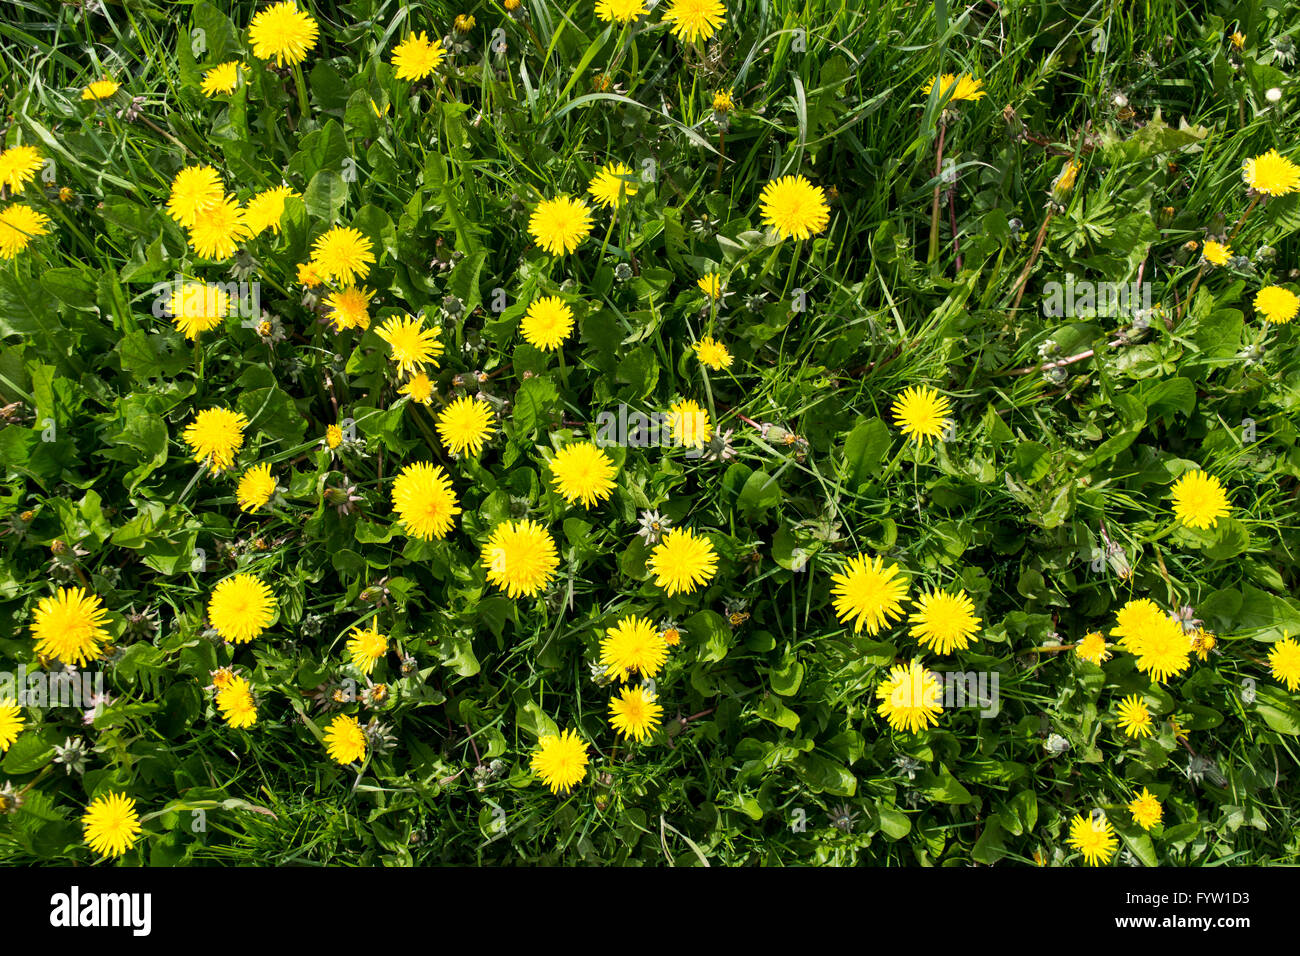 Common Dandelions (Taraxacum officinale) in flower growing in a lawn Stock Photo